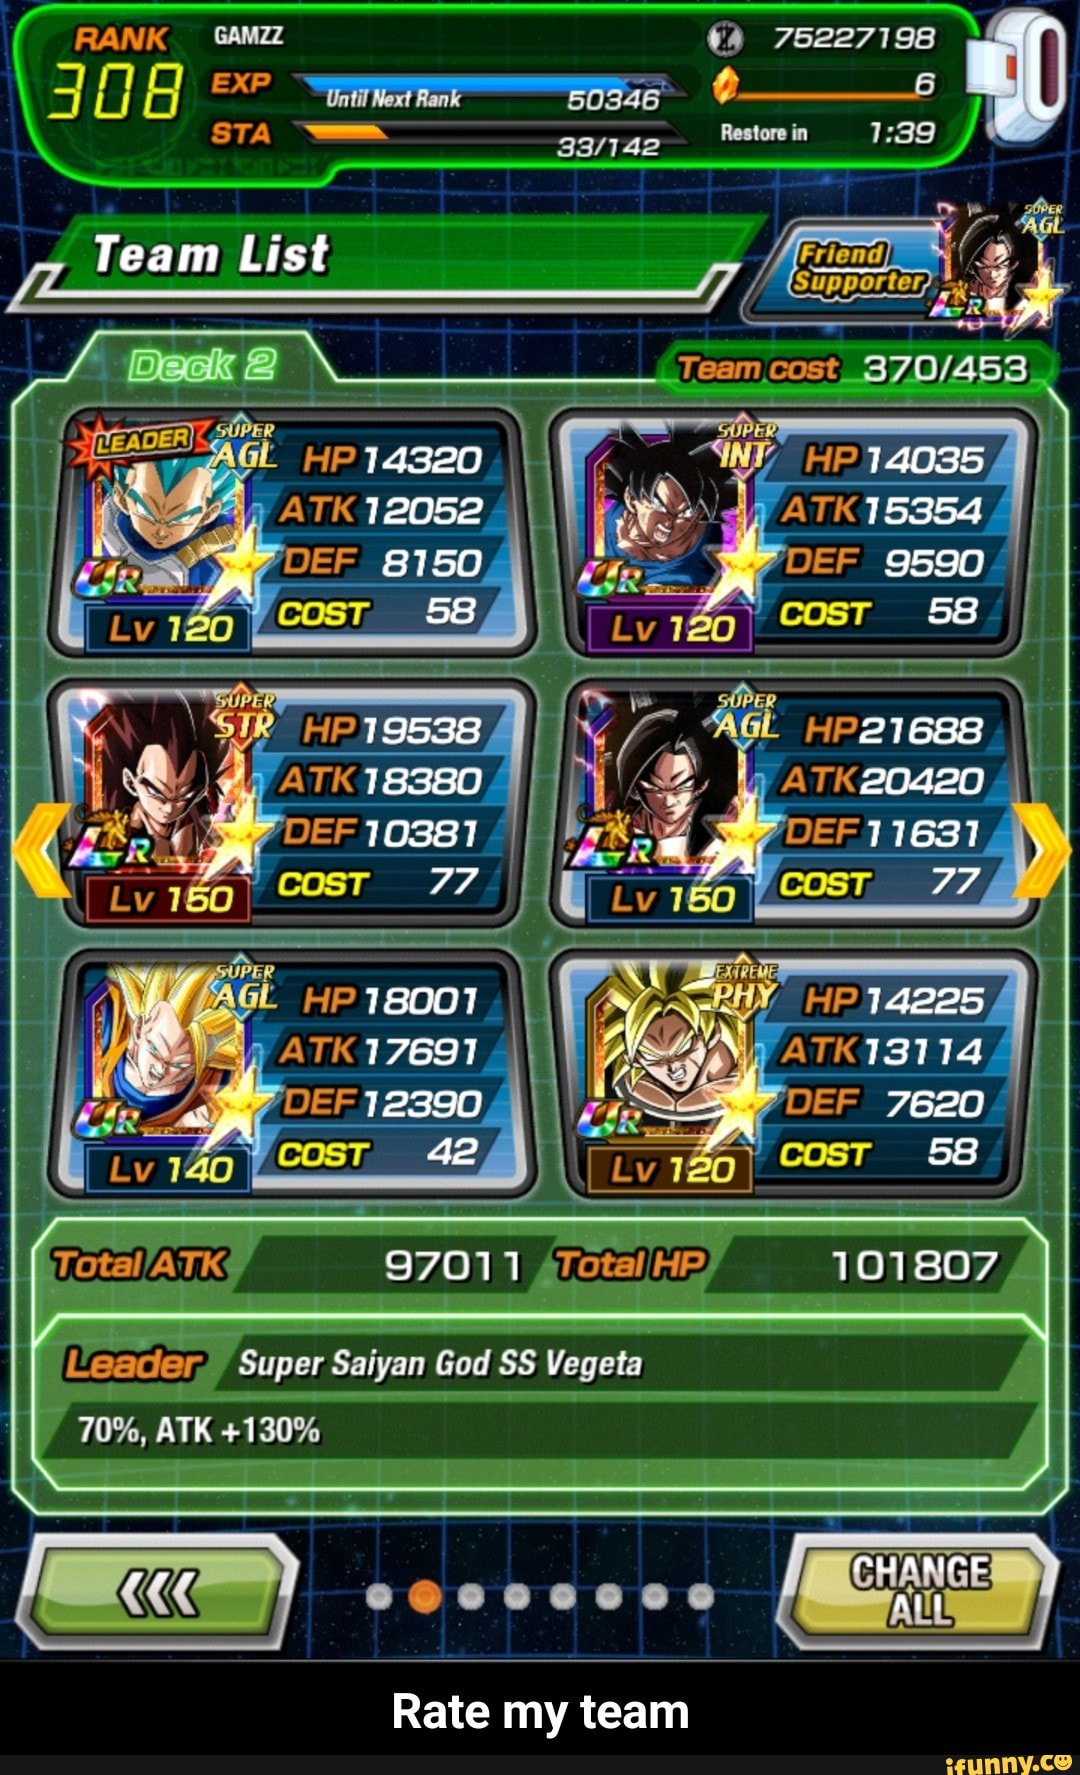 Rate my team Total ATK 9701 1 Total HP 'I 01 807 